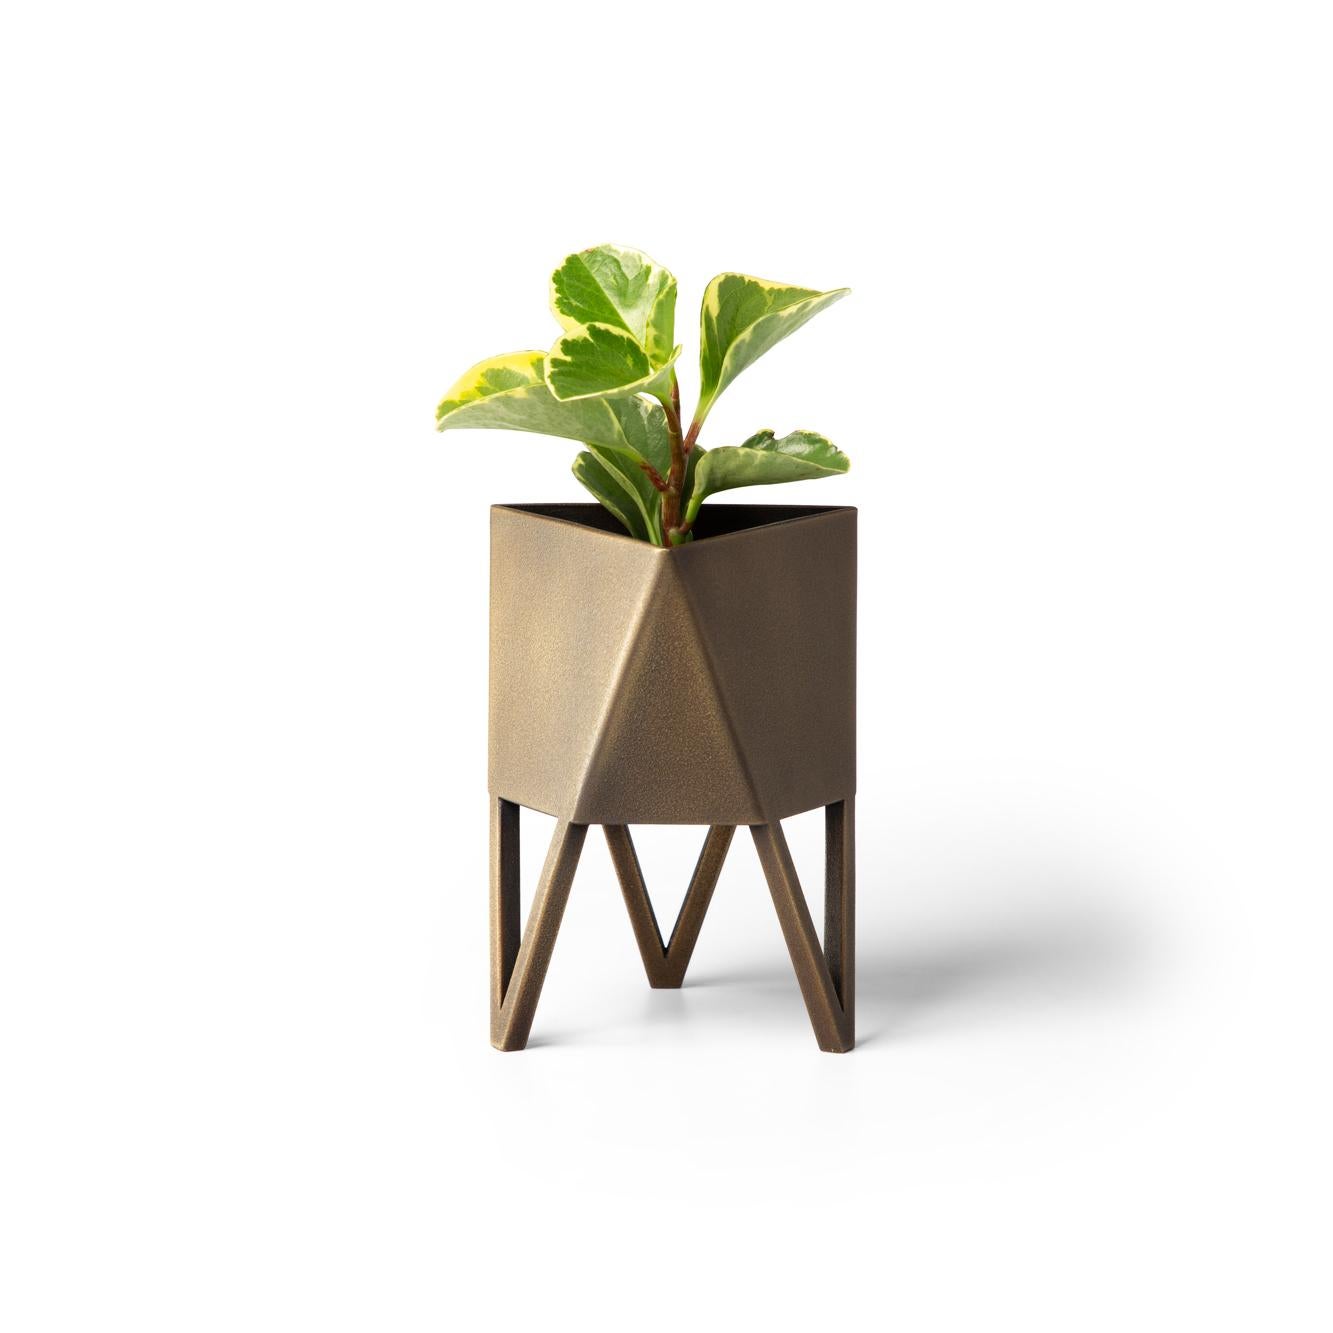 Small Deca Planter in Mint by Force/Collide, 2020 7